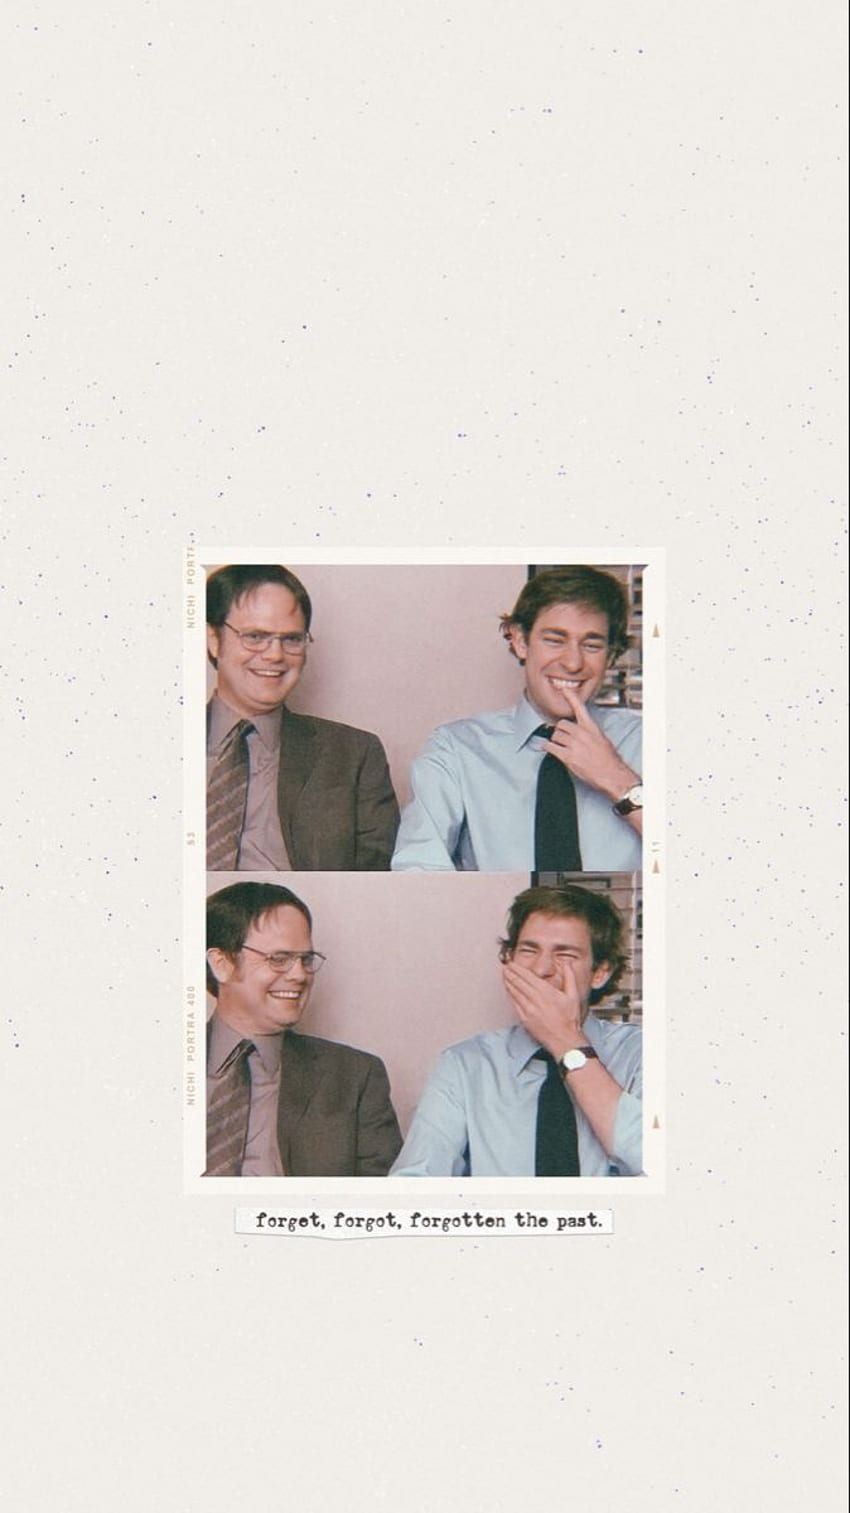 the office jim halpert and dwight schrute background screensaver cute aesthetic friends. The office seasons, The office show, The office jim, Jim Halpert and Pam Beesly HD phone wallpaper